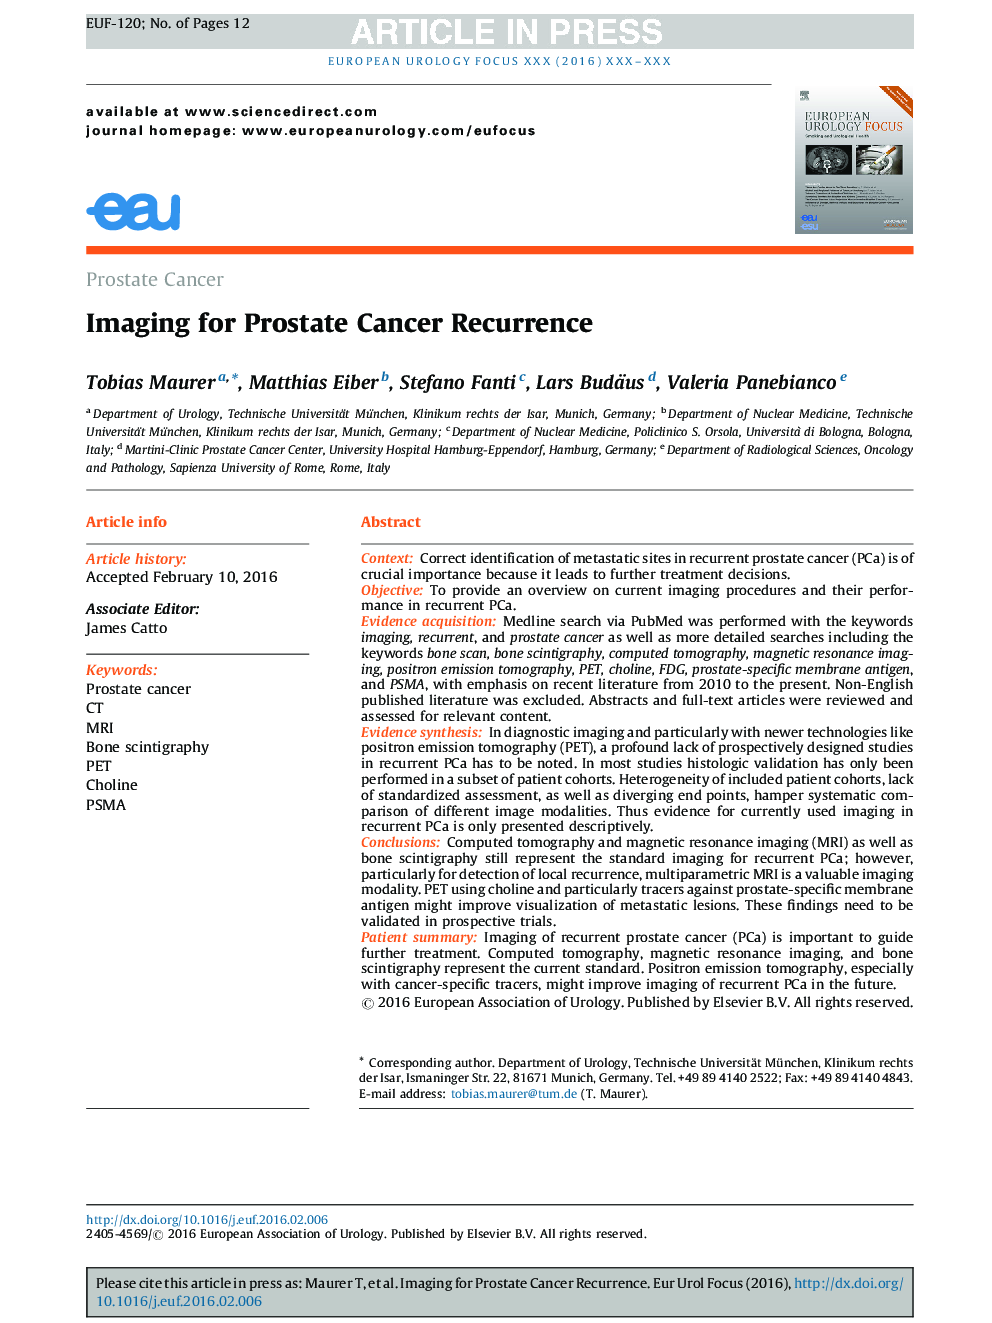 Imaging for Prostate Cancer Recurrence